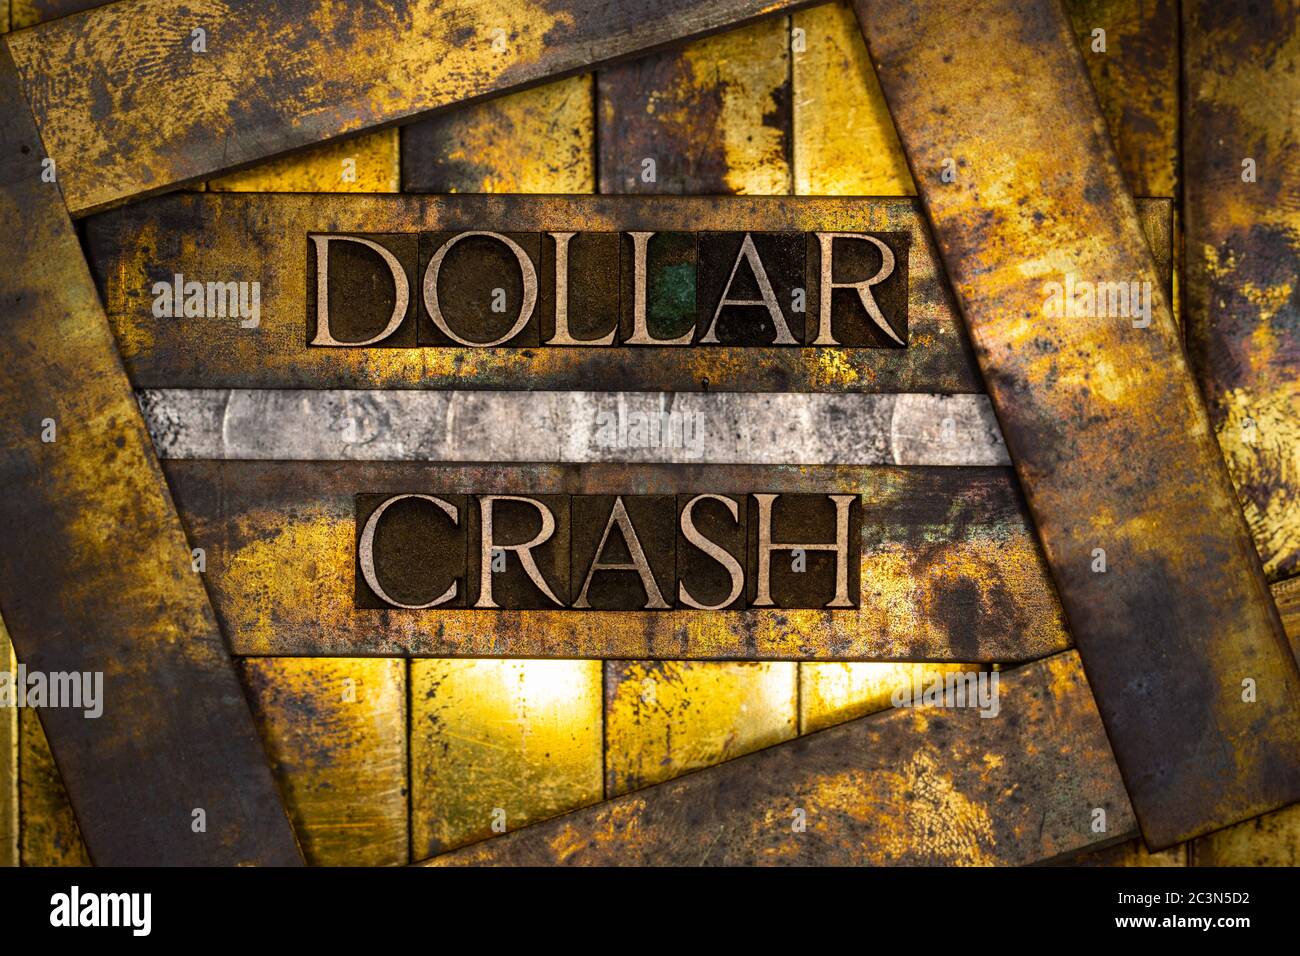 Dollar Crash text formed with real authentic typeset letters on vintage textured silver grunge copper and gold background Stock Photo